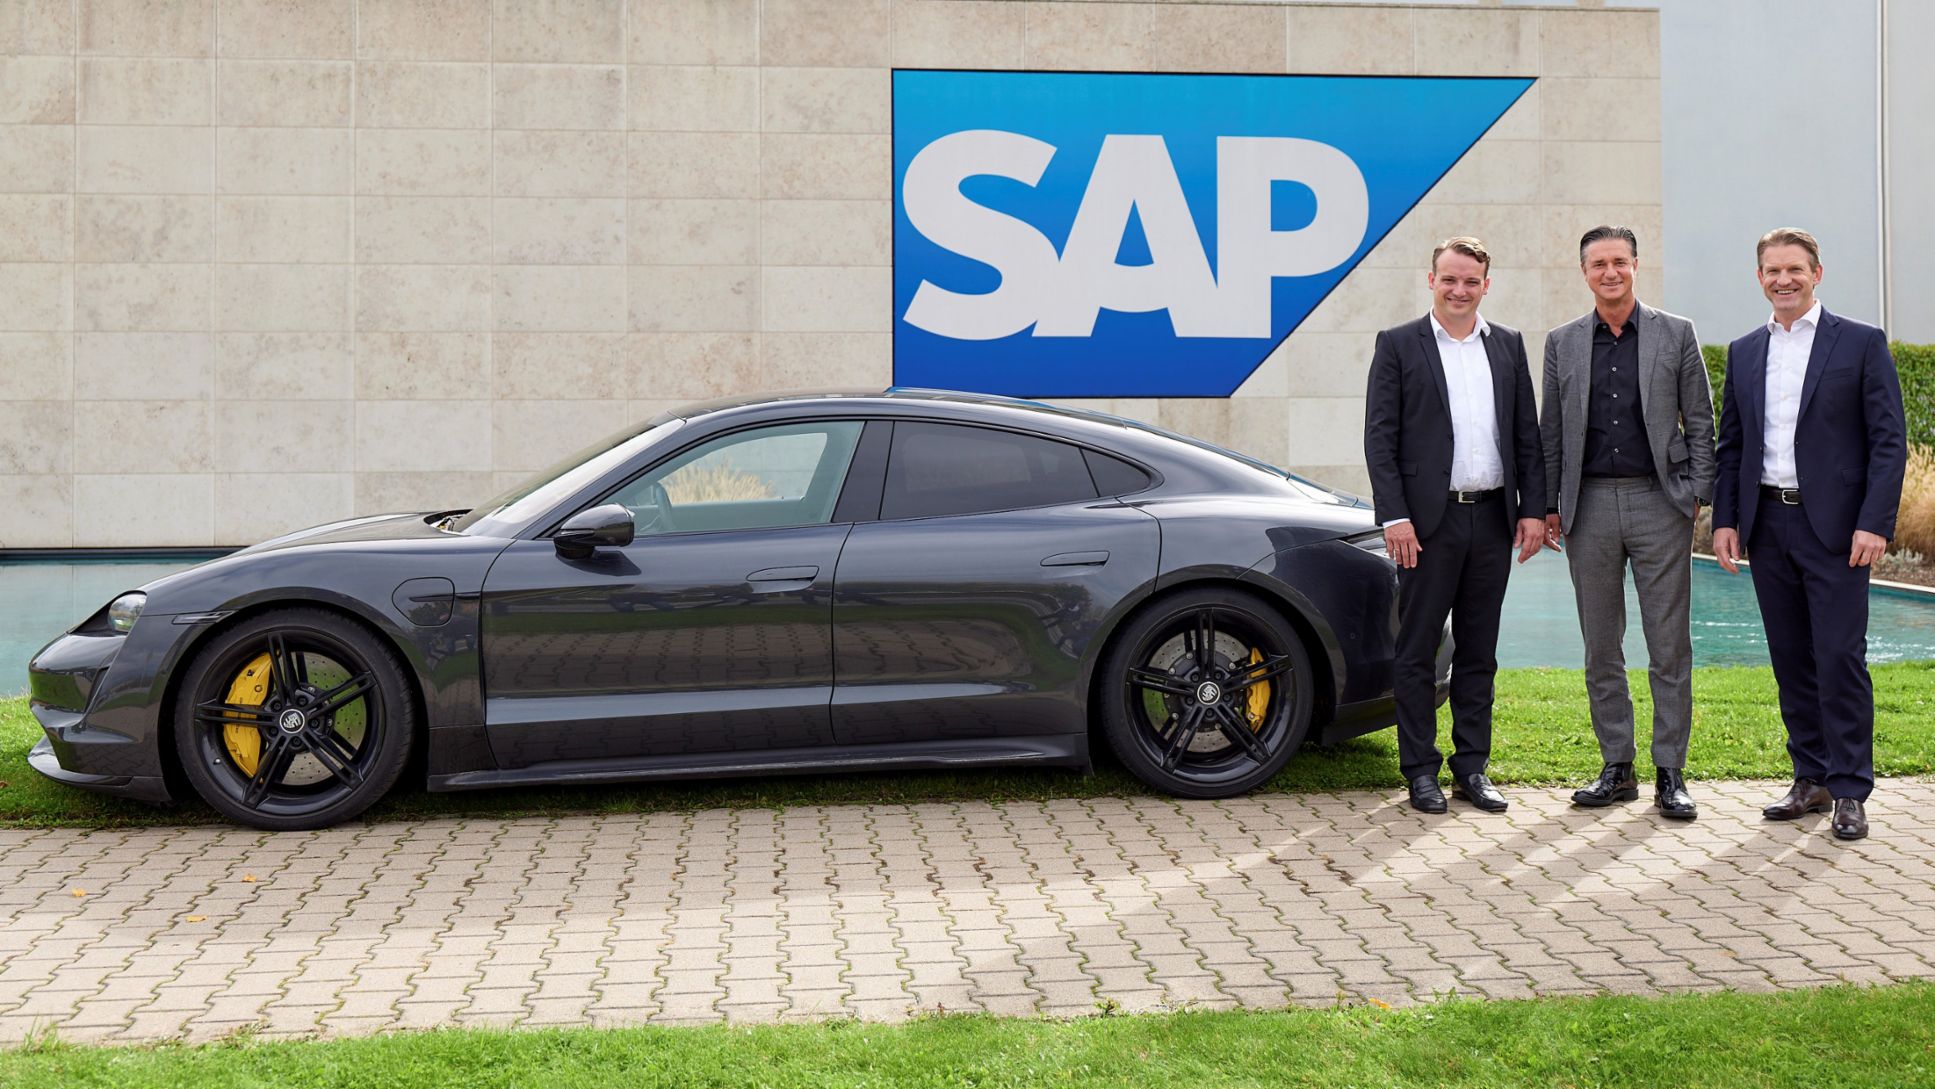 Christian Klein, Co-CEO of SAP SE, Lutz Meschke, Deputy Chairman and Member of the Executive Board for Finance and IT at Porsche, Dr. Daniel Holz, Managing Director of SAP Germany, 2019, Porsche AG